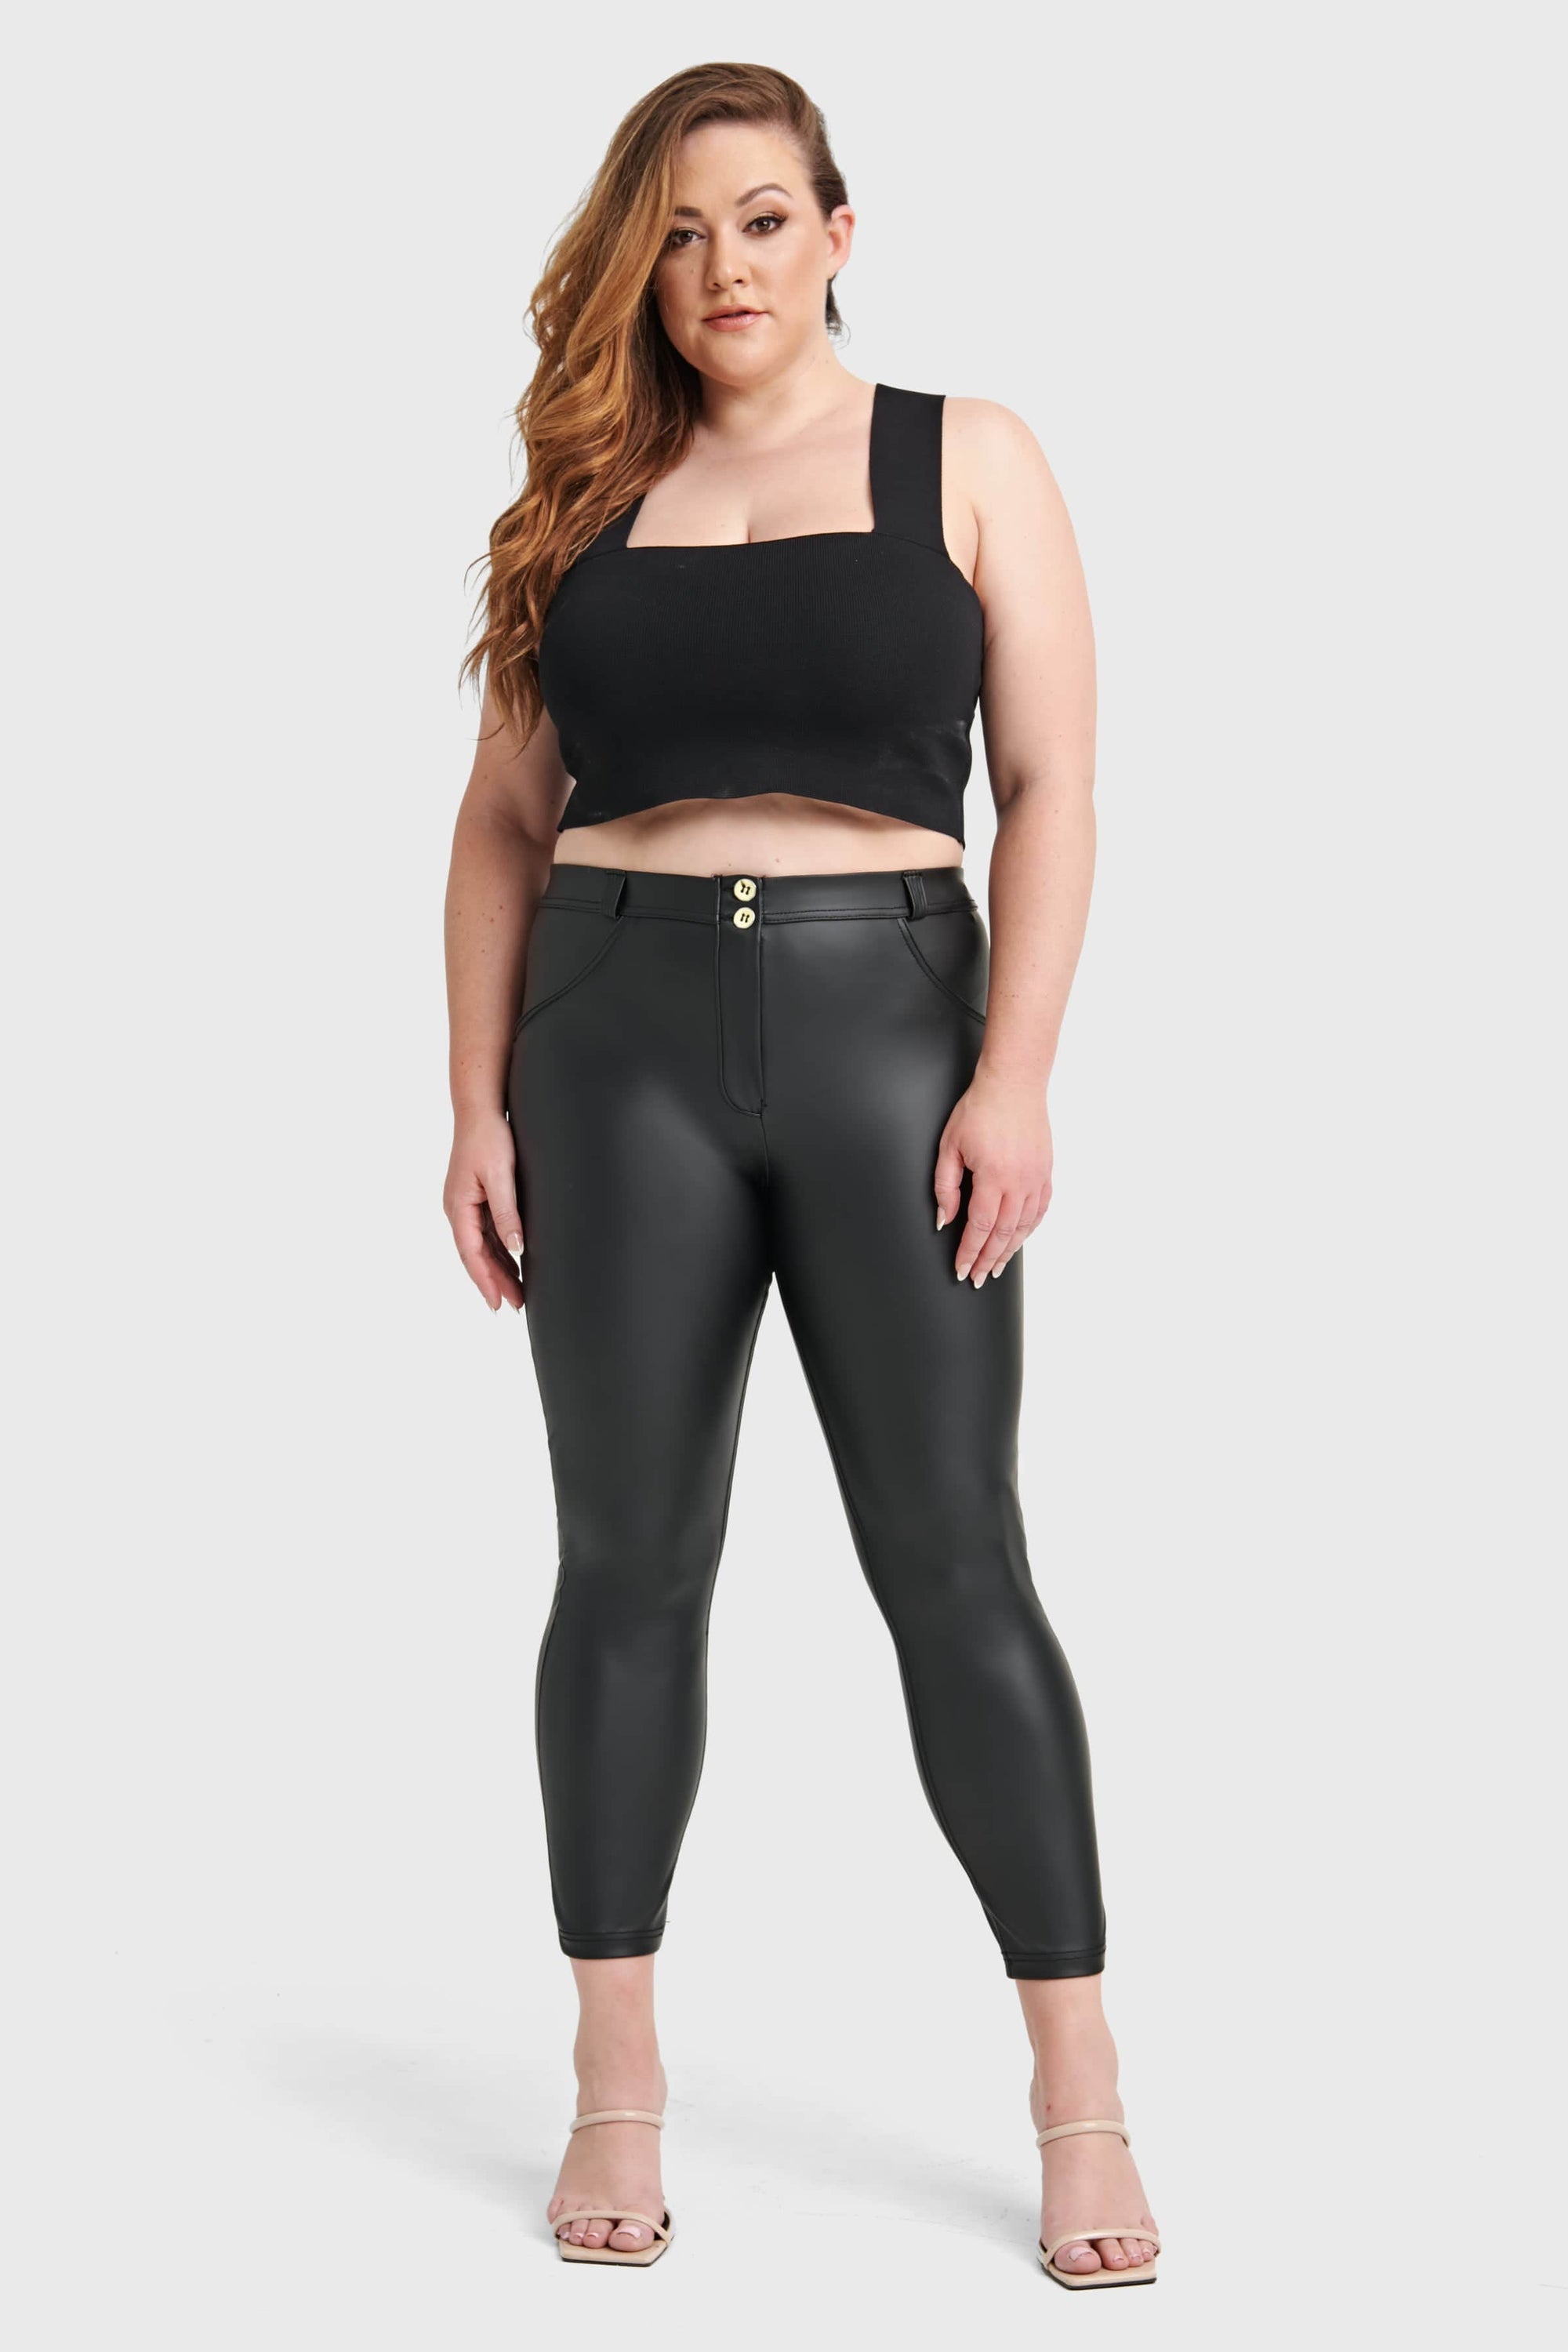 WR.UP® Curvy Faux Leather - High Waisted - Petite Length - Black 5